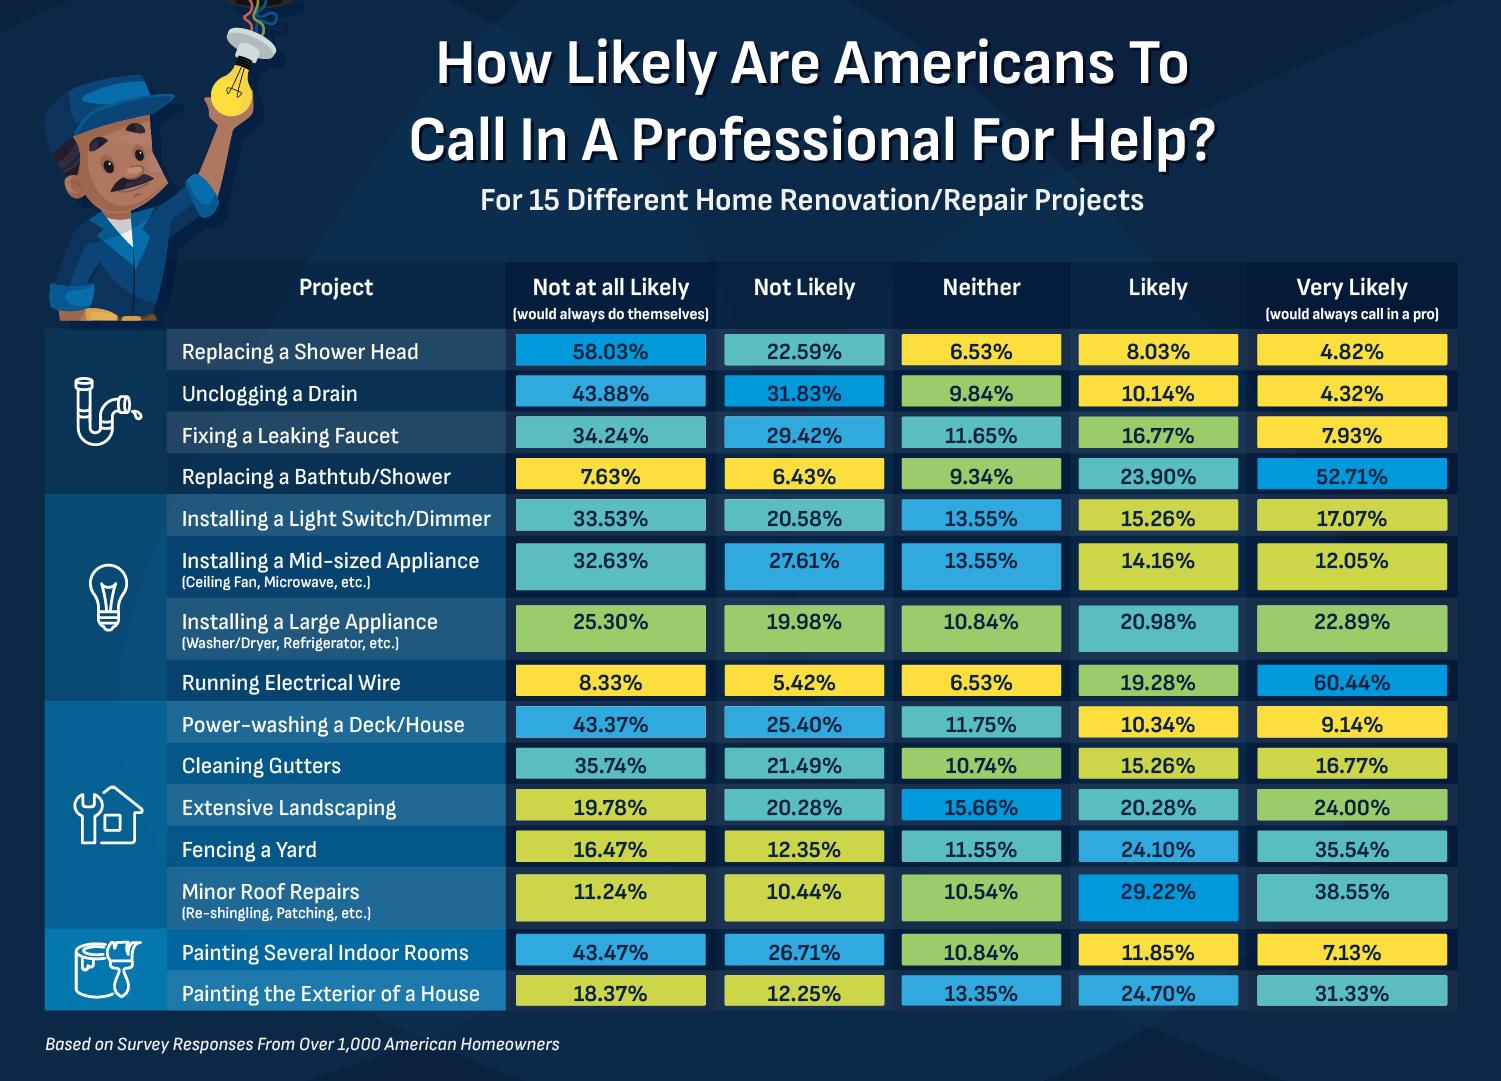 A graphic showing the types of projects Americans are most and least likely to call in a professional for help with.